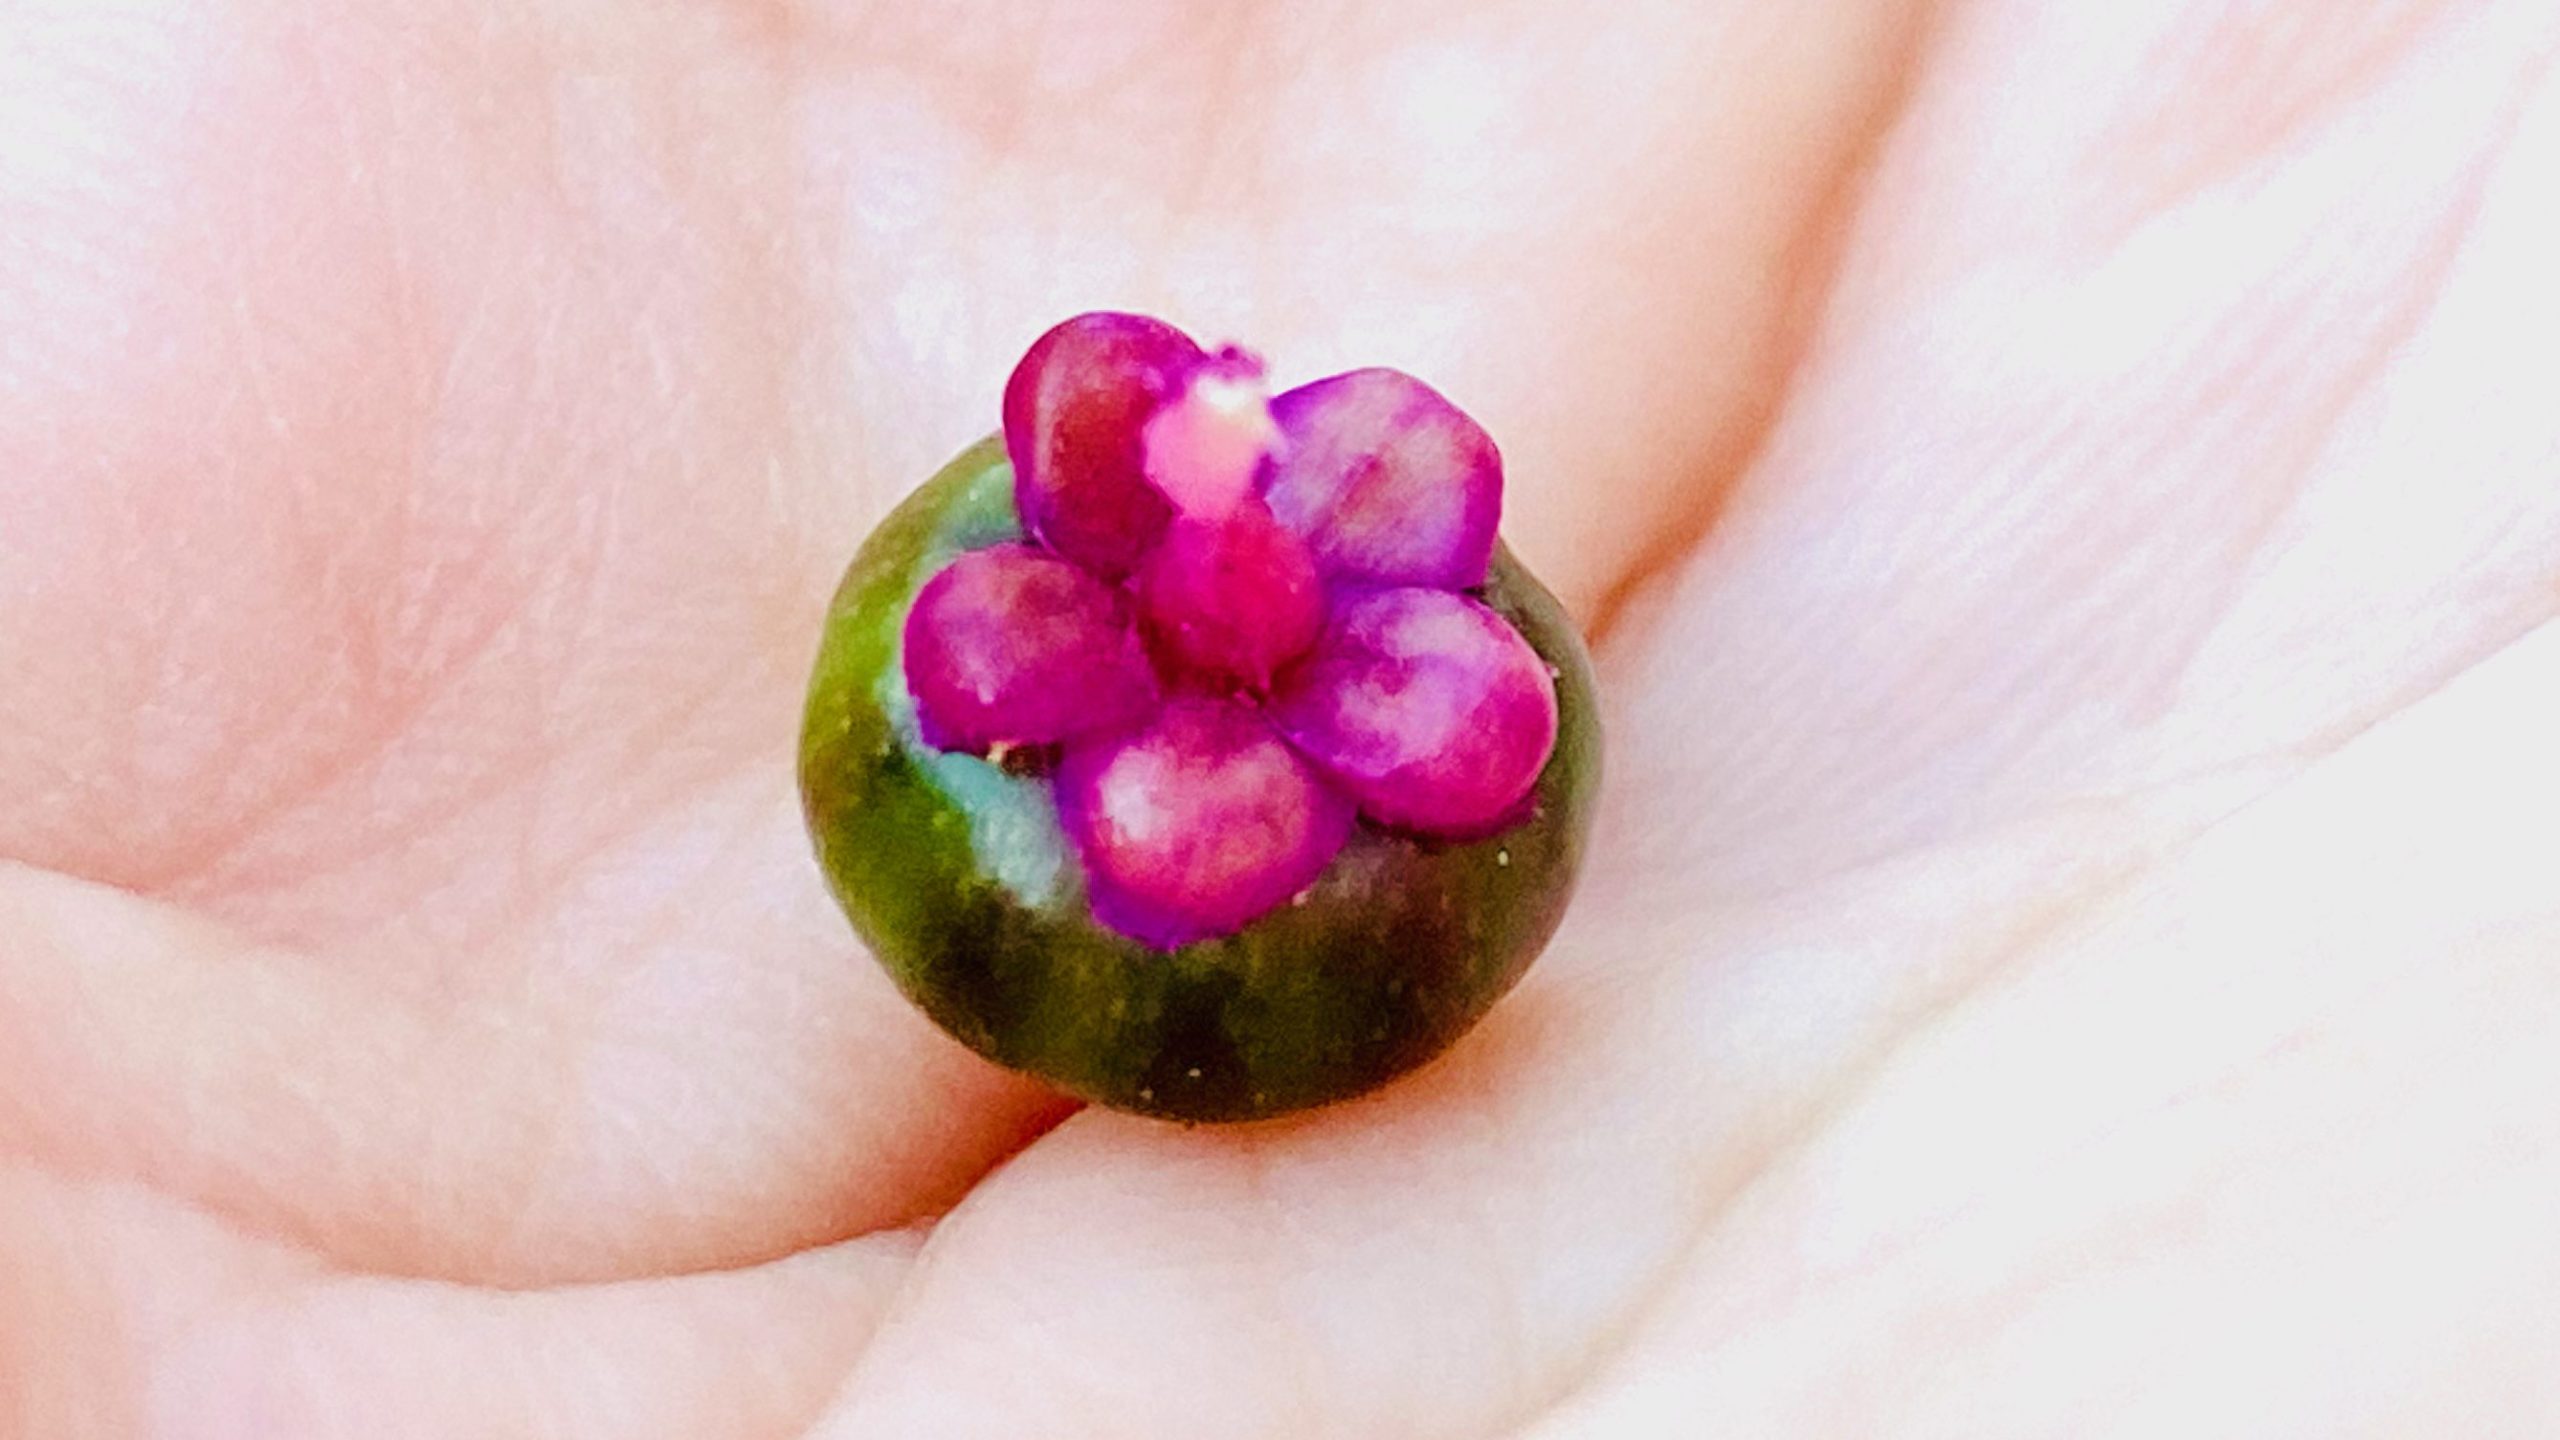 A poke berry in the palm of a hand - a fuchsia rosette sitting atop a round green berry